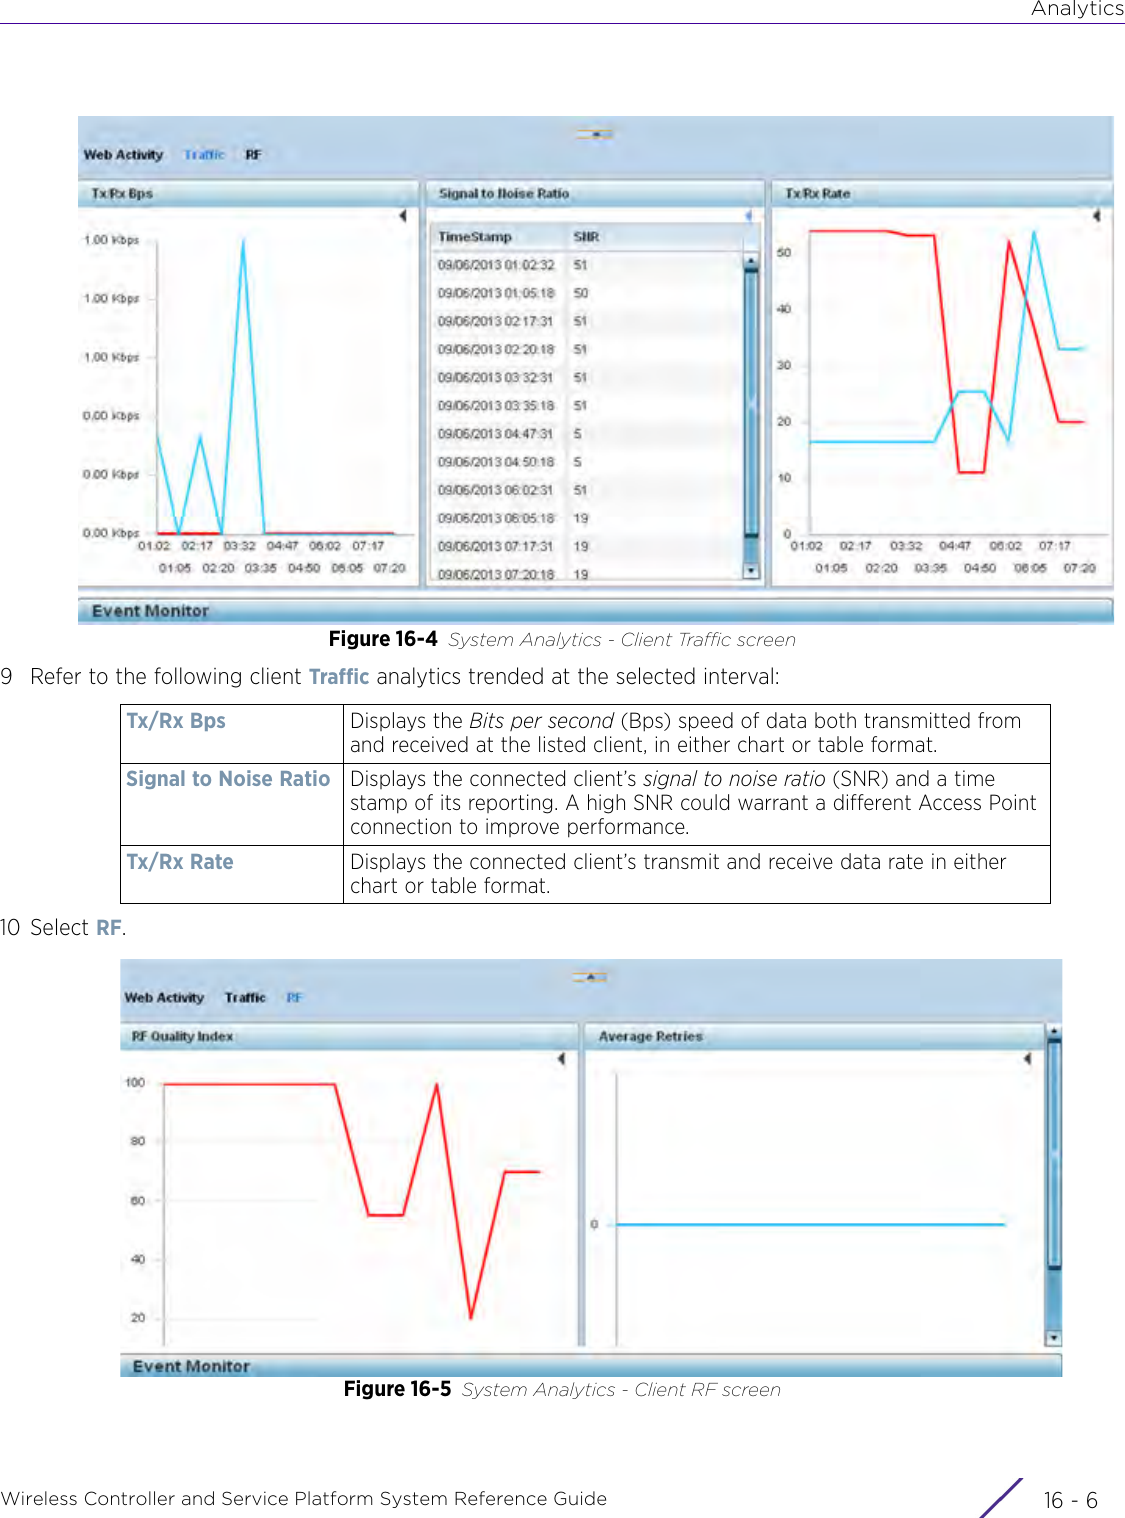 AnalyticsWireless Controller and Service Platform System Reference Guide  16 - 6Figure 16-4 System Analytics - Client Traffic screen 9 Refer to the following client Traffic analytics trended at the selected interval:10 Select RF.Figure 16-5 System Analytics - Client RF screenTx/Rx Bps Displays the Bits per second (Bps) speed of data both transmitted from and received at the listed client, in either chart or table format.Signal to Noise Ratio Displays the connected client’s signal to noise ratio (SNR) and a time stamp of its reporting. A high SNR could warrant a different Access Point connection to improve performance.Tx/Rx Rate Displays the connected client’s transmit and receive data rate in either chart or table format.